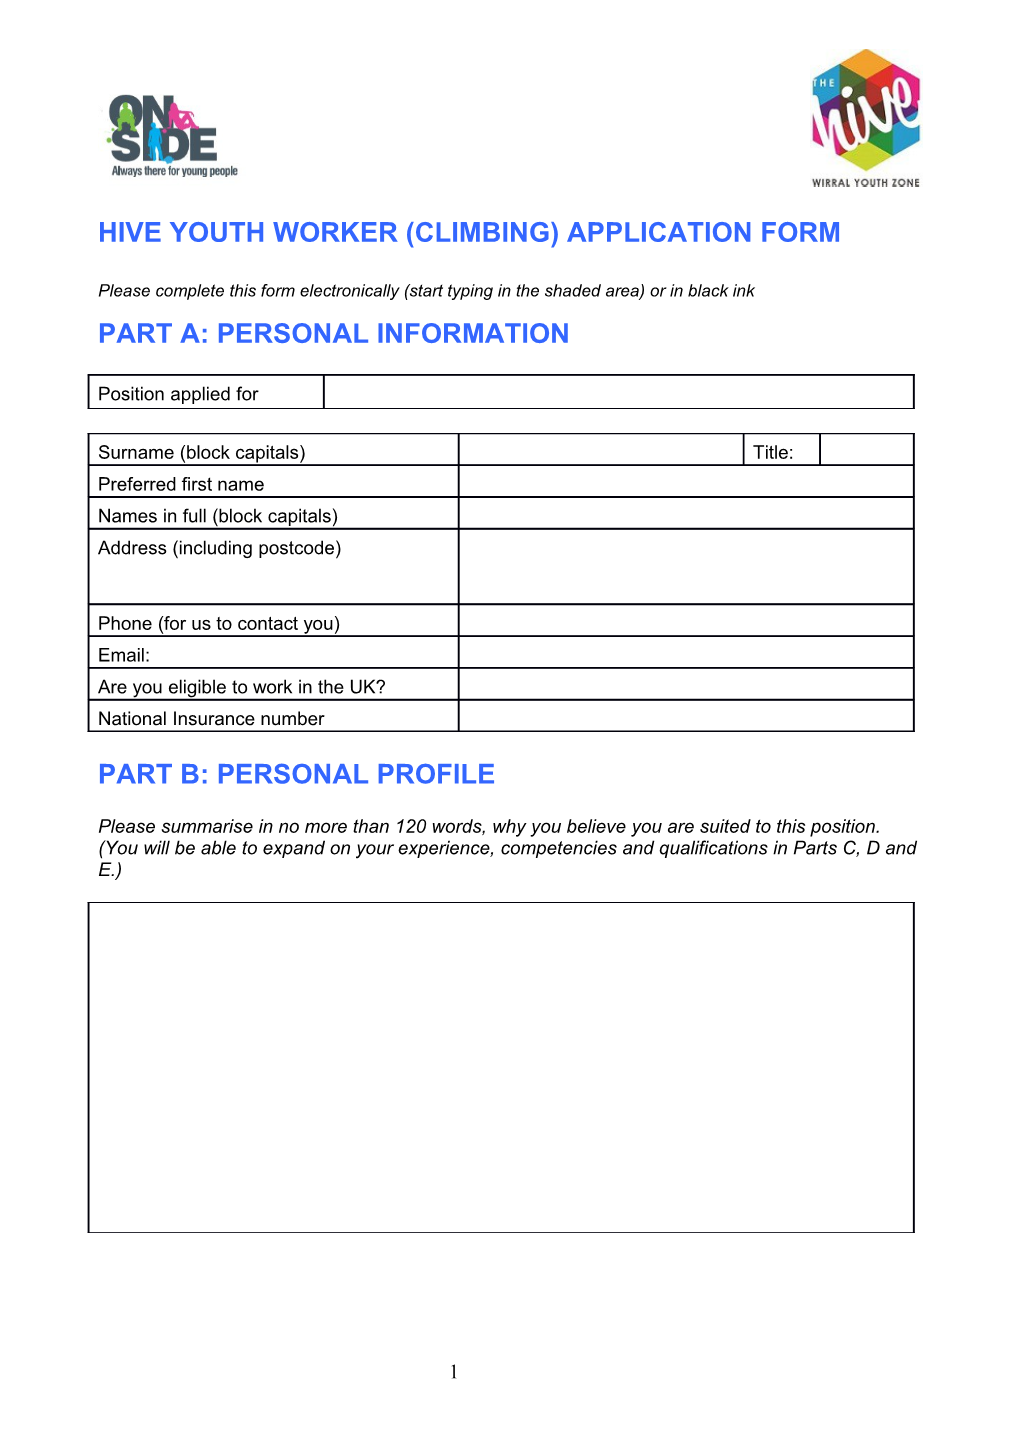 Hive Youth Worker (Climbing) Application Form